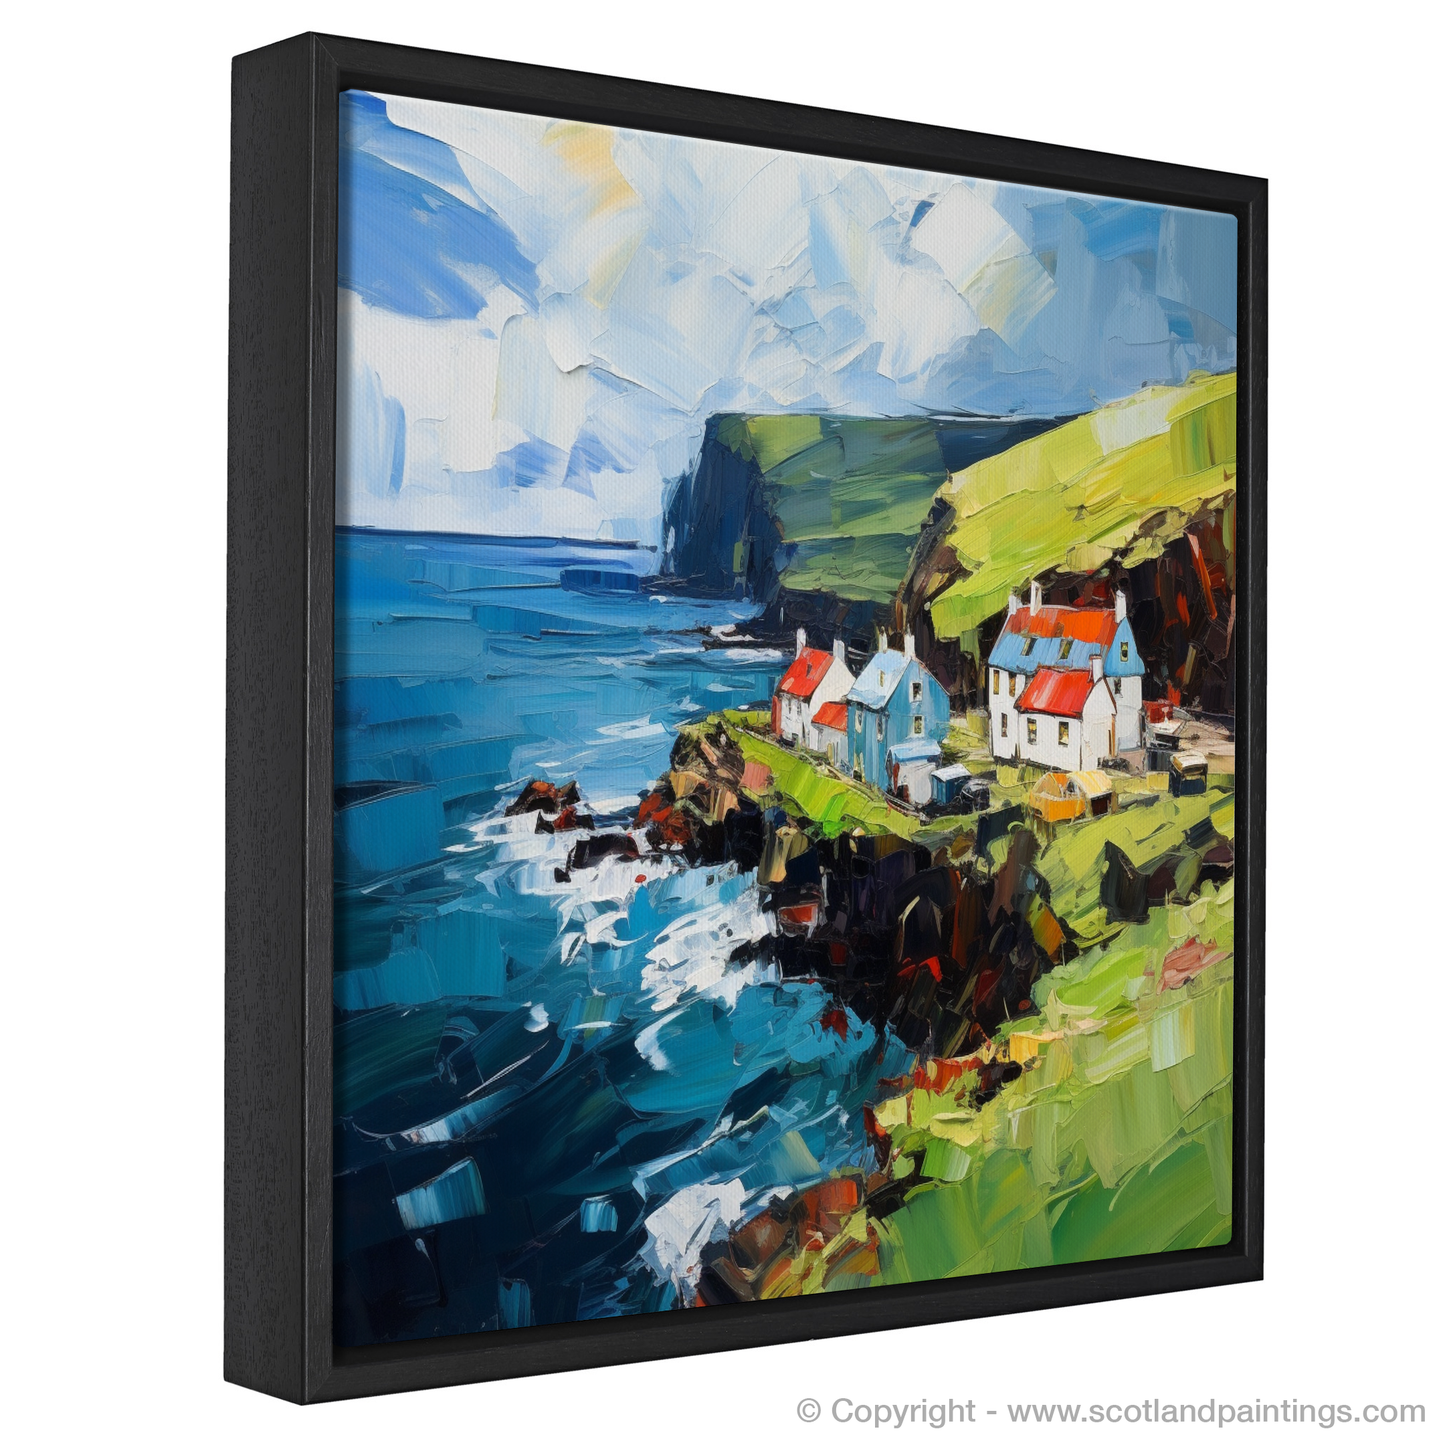 Painting and Art Print of Pennan Harbour, Aberdeenshire entitled "Pennan Harbour: A Symphony of Colour and Emotion".